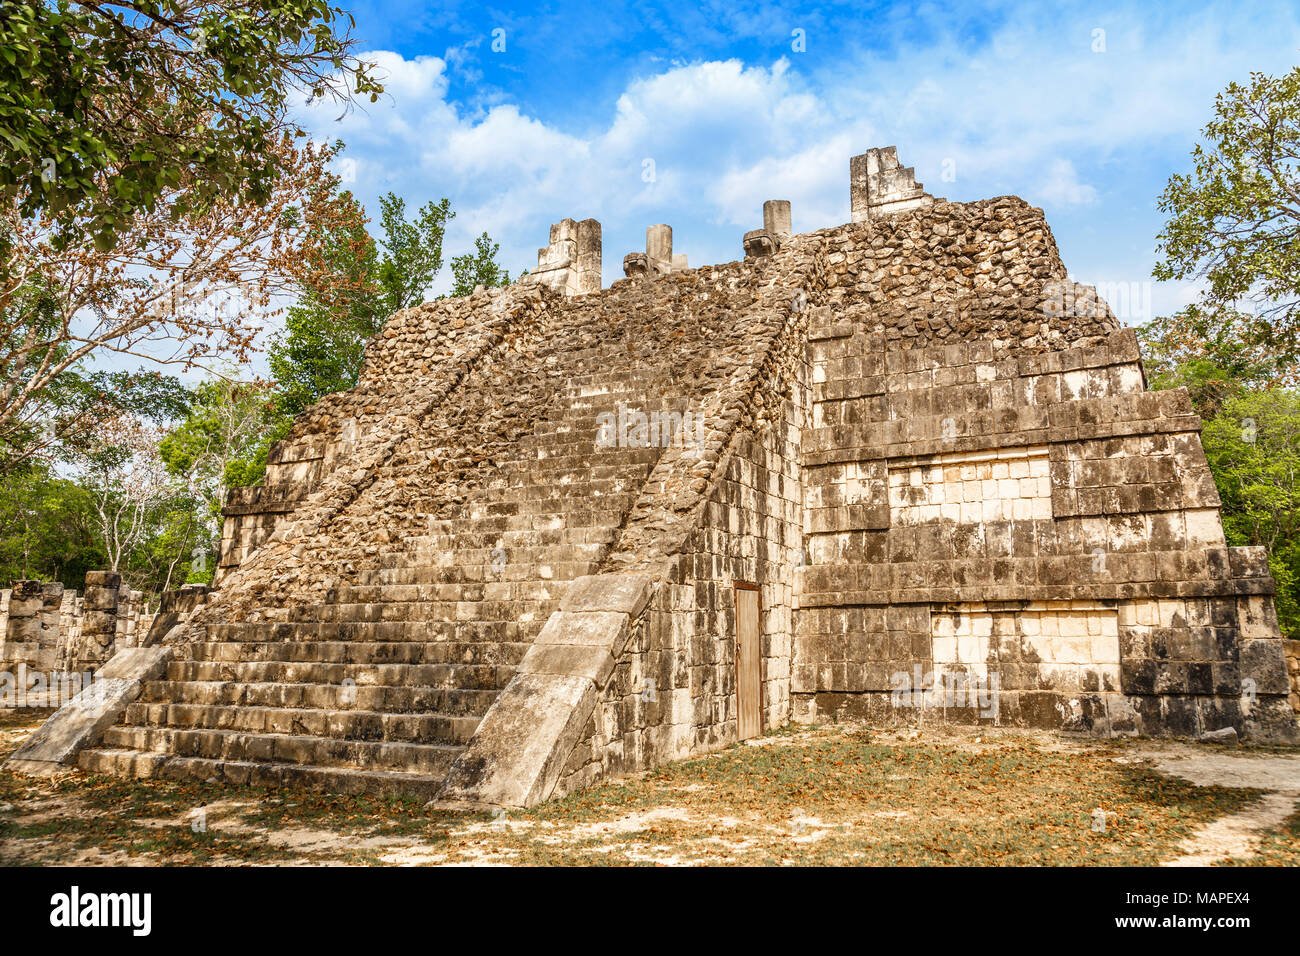 Small mayan pyramid in the forest, Chichen Itza archaeological site, Yucatan, Mexico Stock Photo